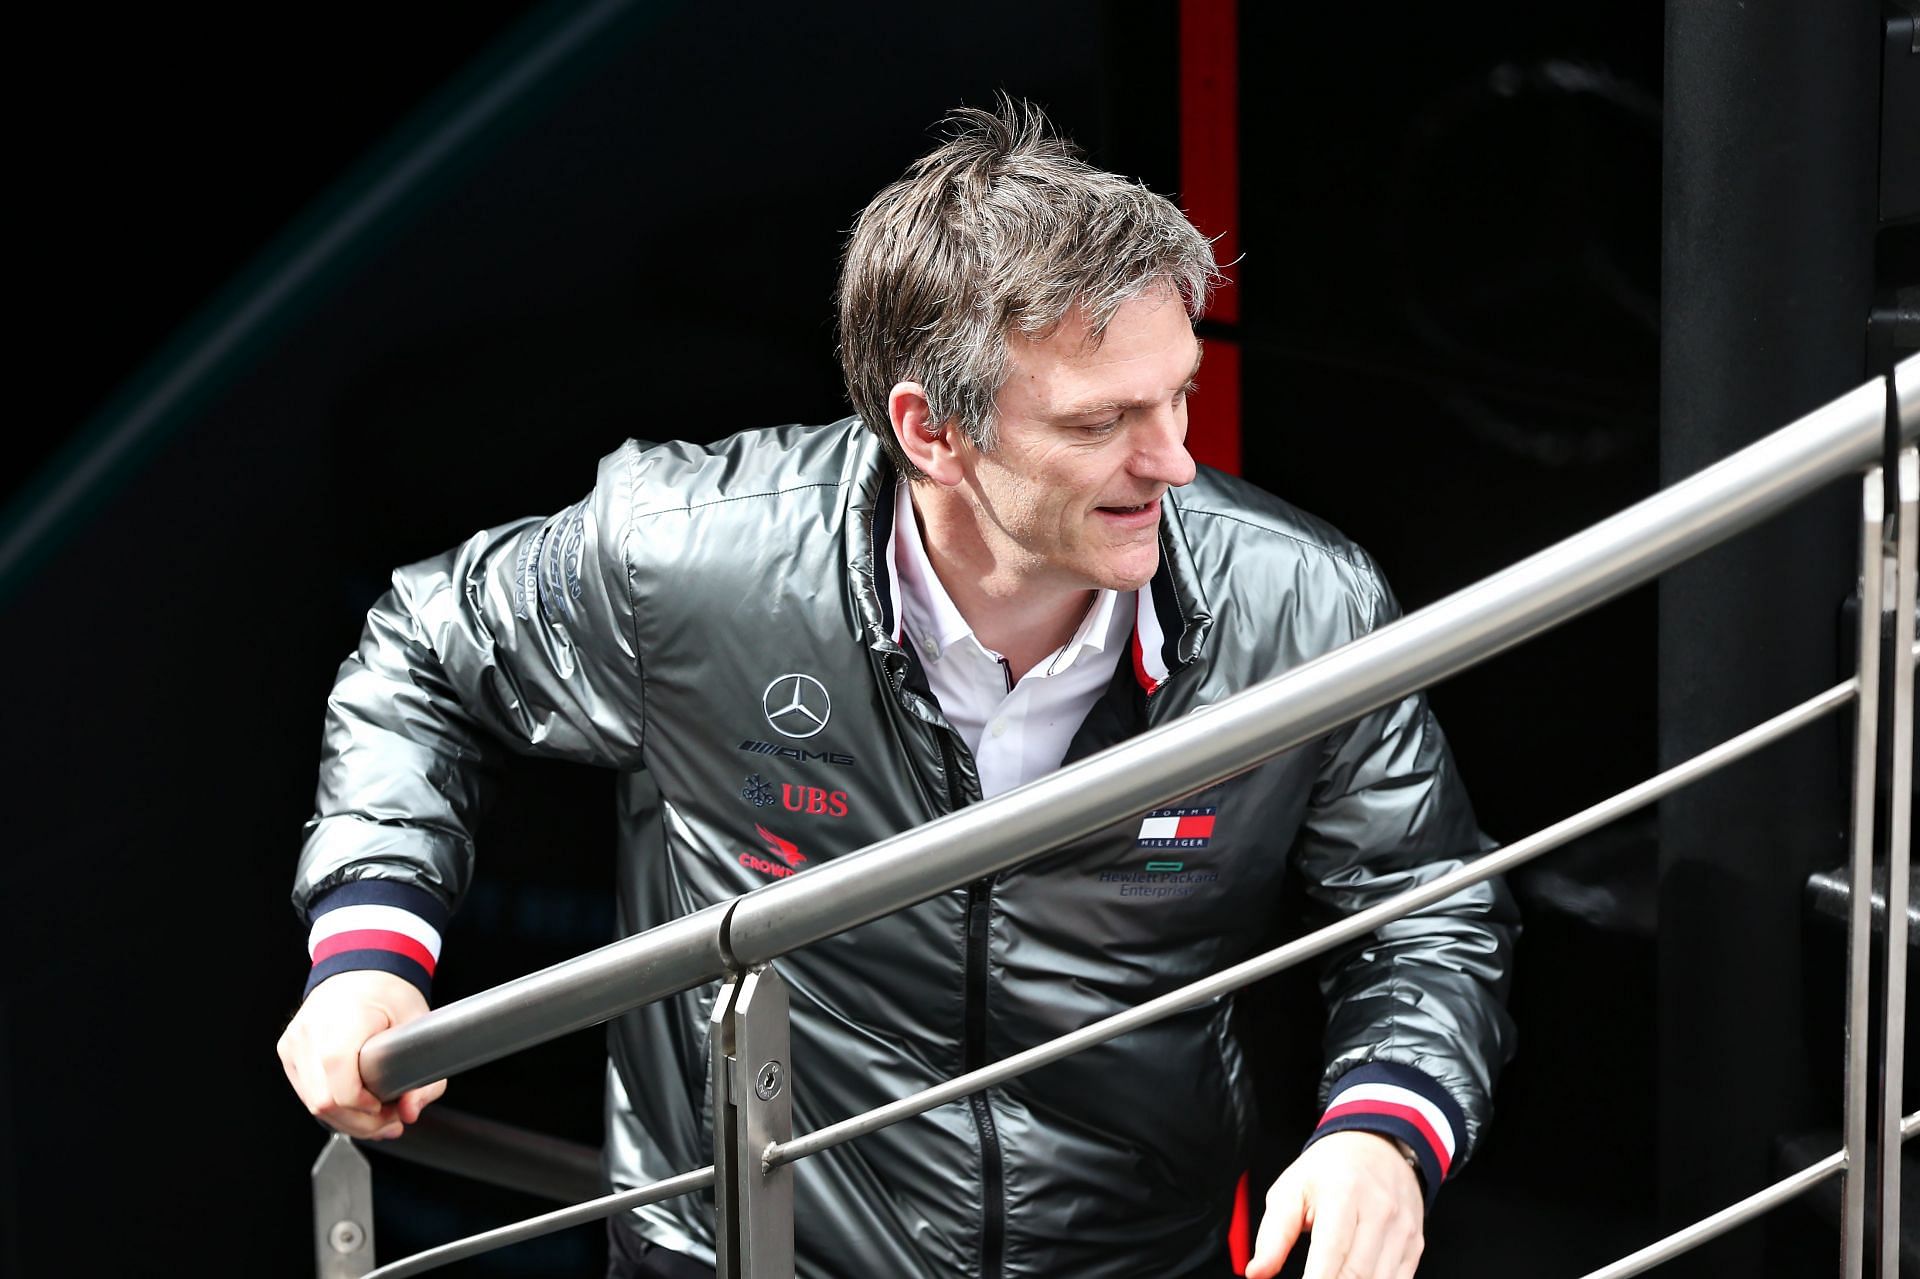 James Allison, Technical Director at Mercedes F1 Team. (Photo by Charles Coates/Getty Images)